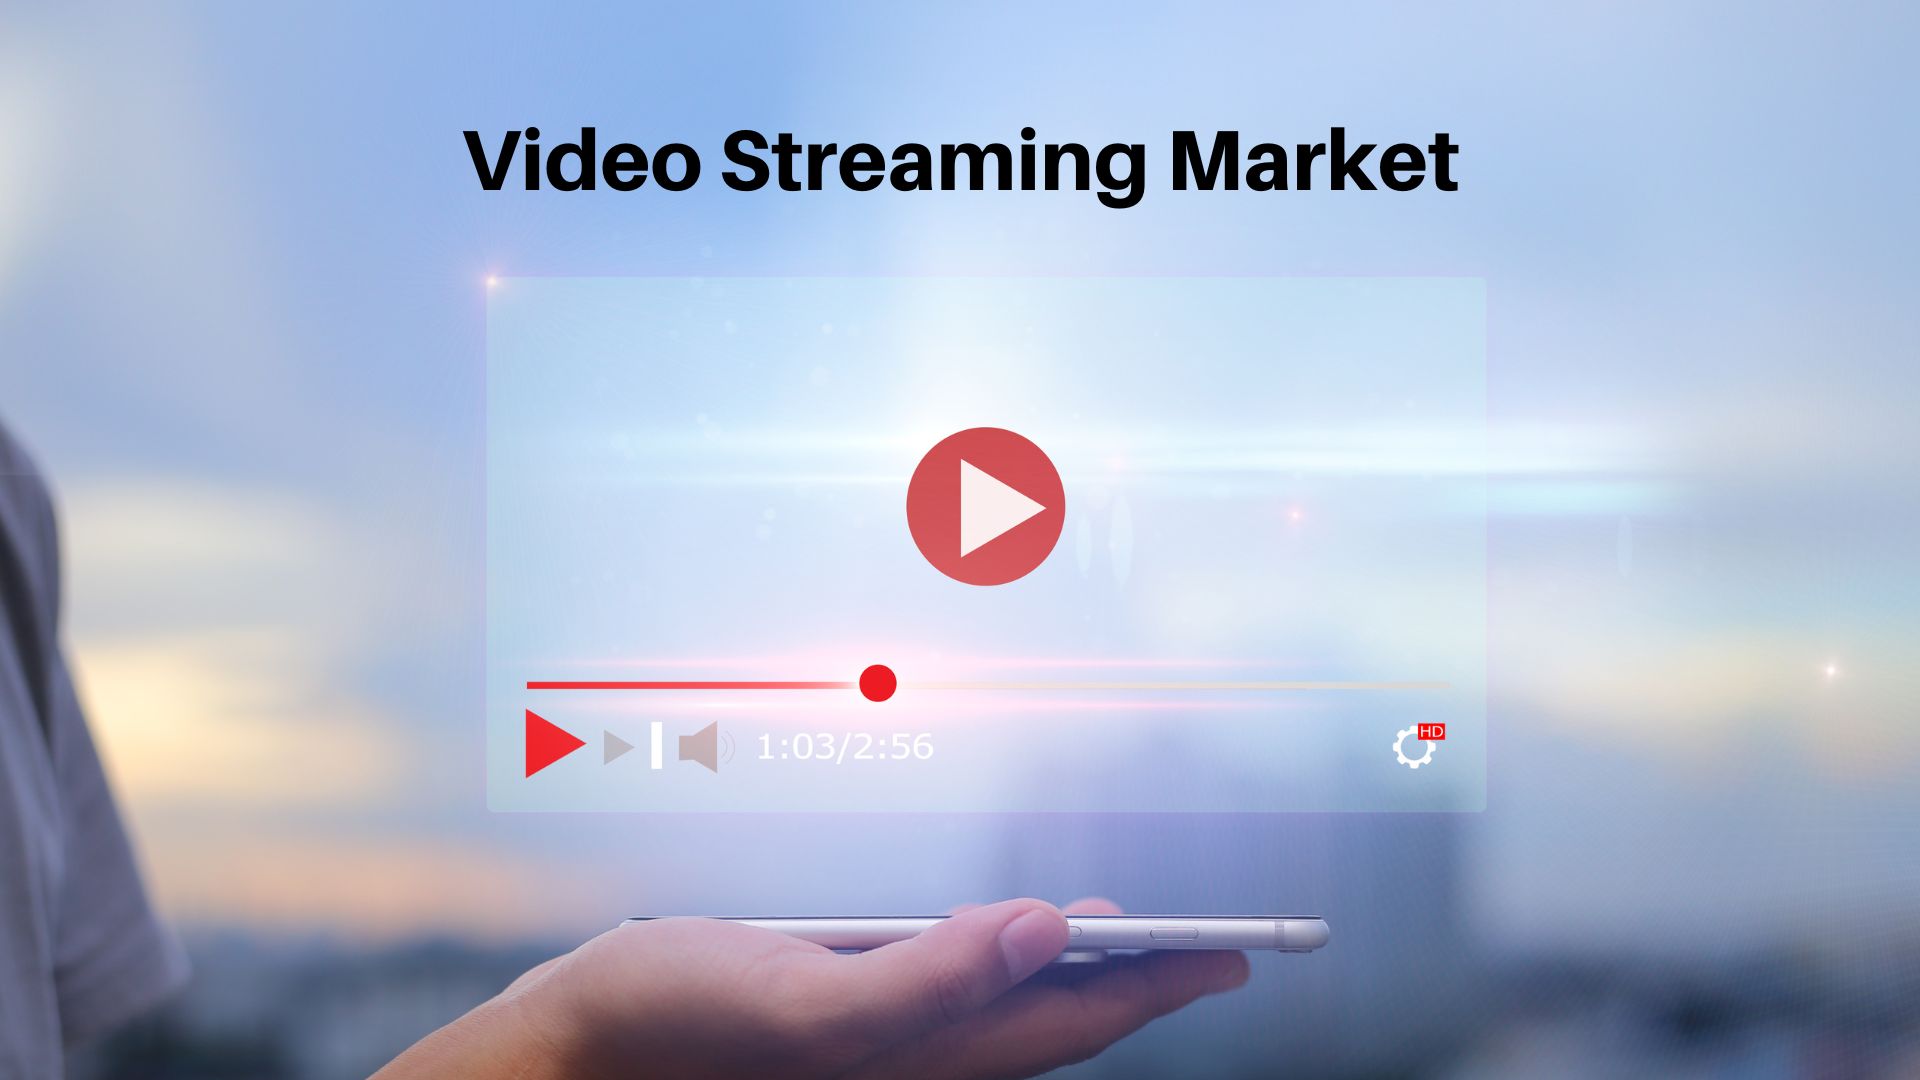 Global Video Streaming Market Projected To Reach USD 3431.4 billion By 2033, at a CAGR Of 20.3%